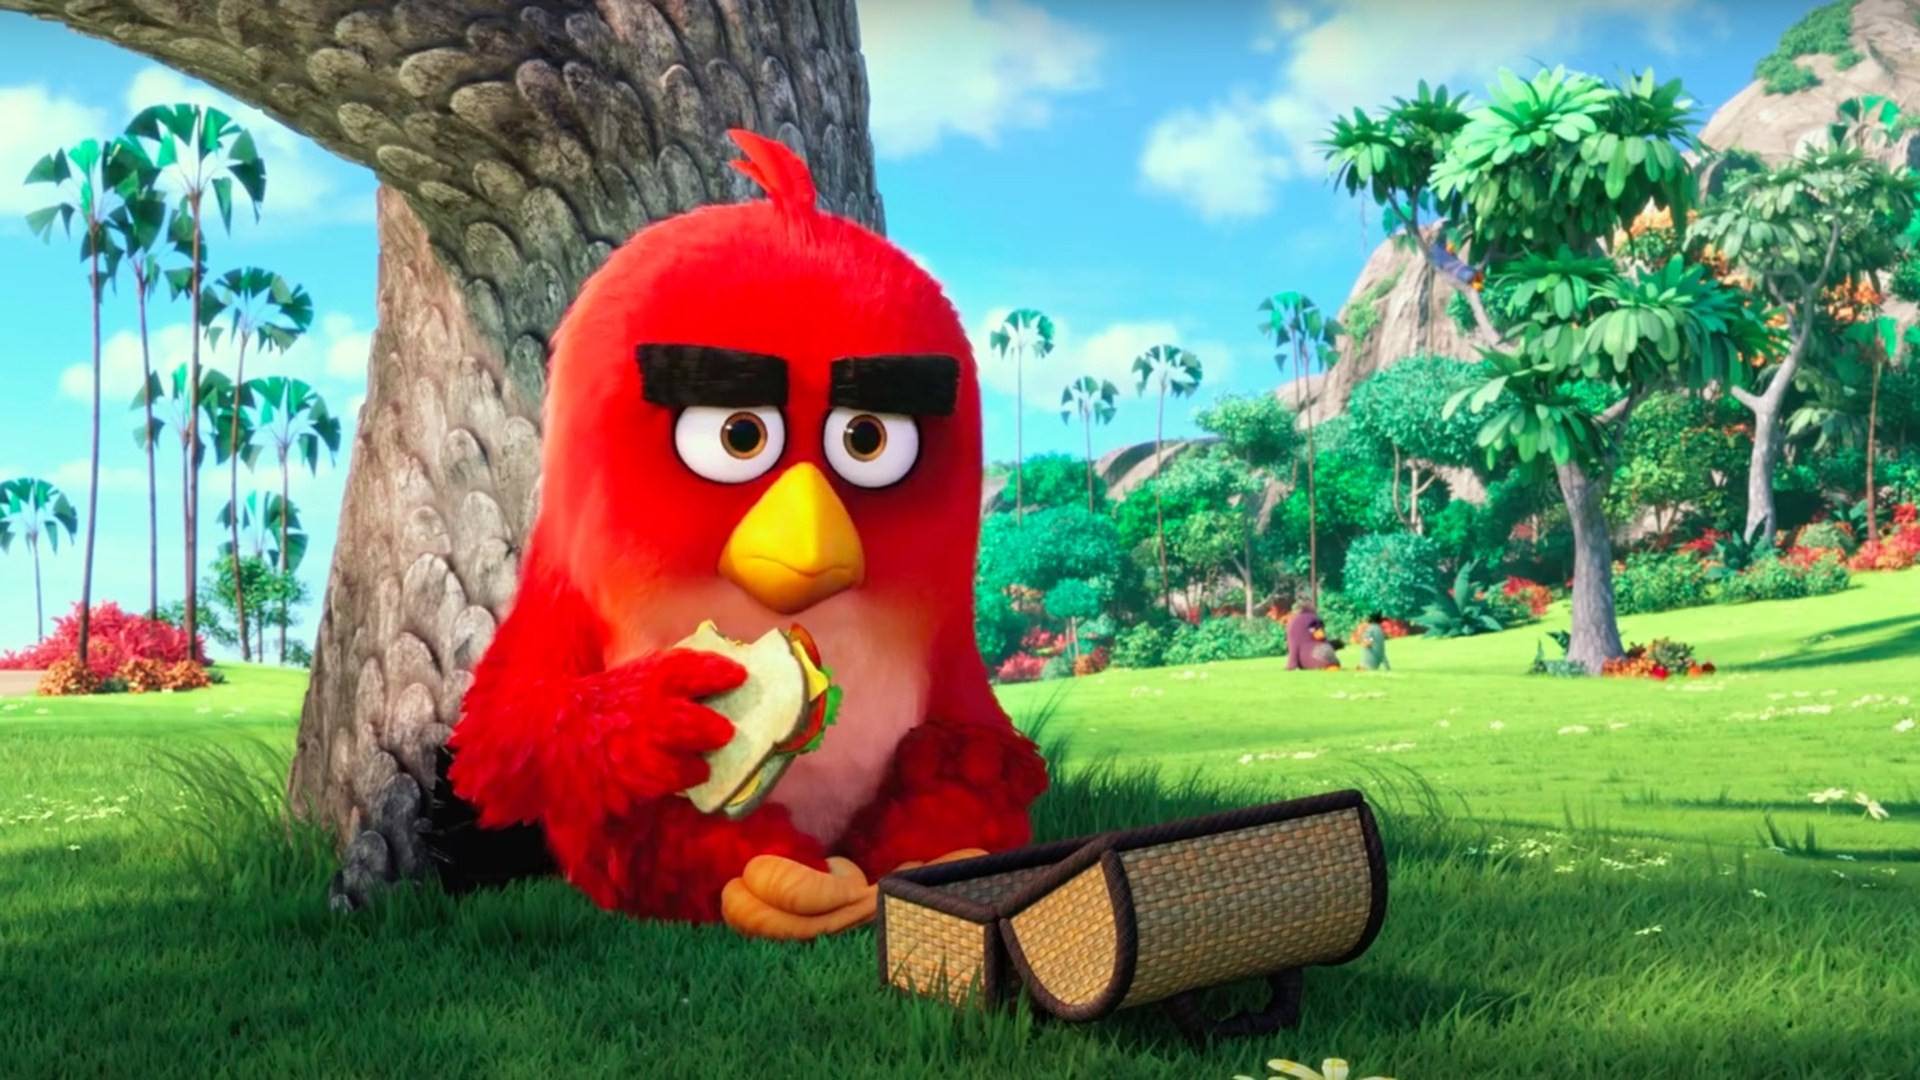 Download Free Red in Angry Birds Movie. HD Wallpaper & Desktop